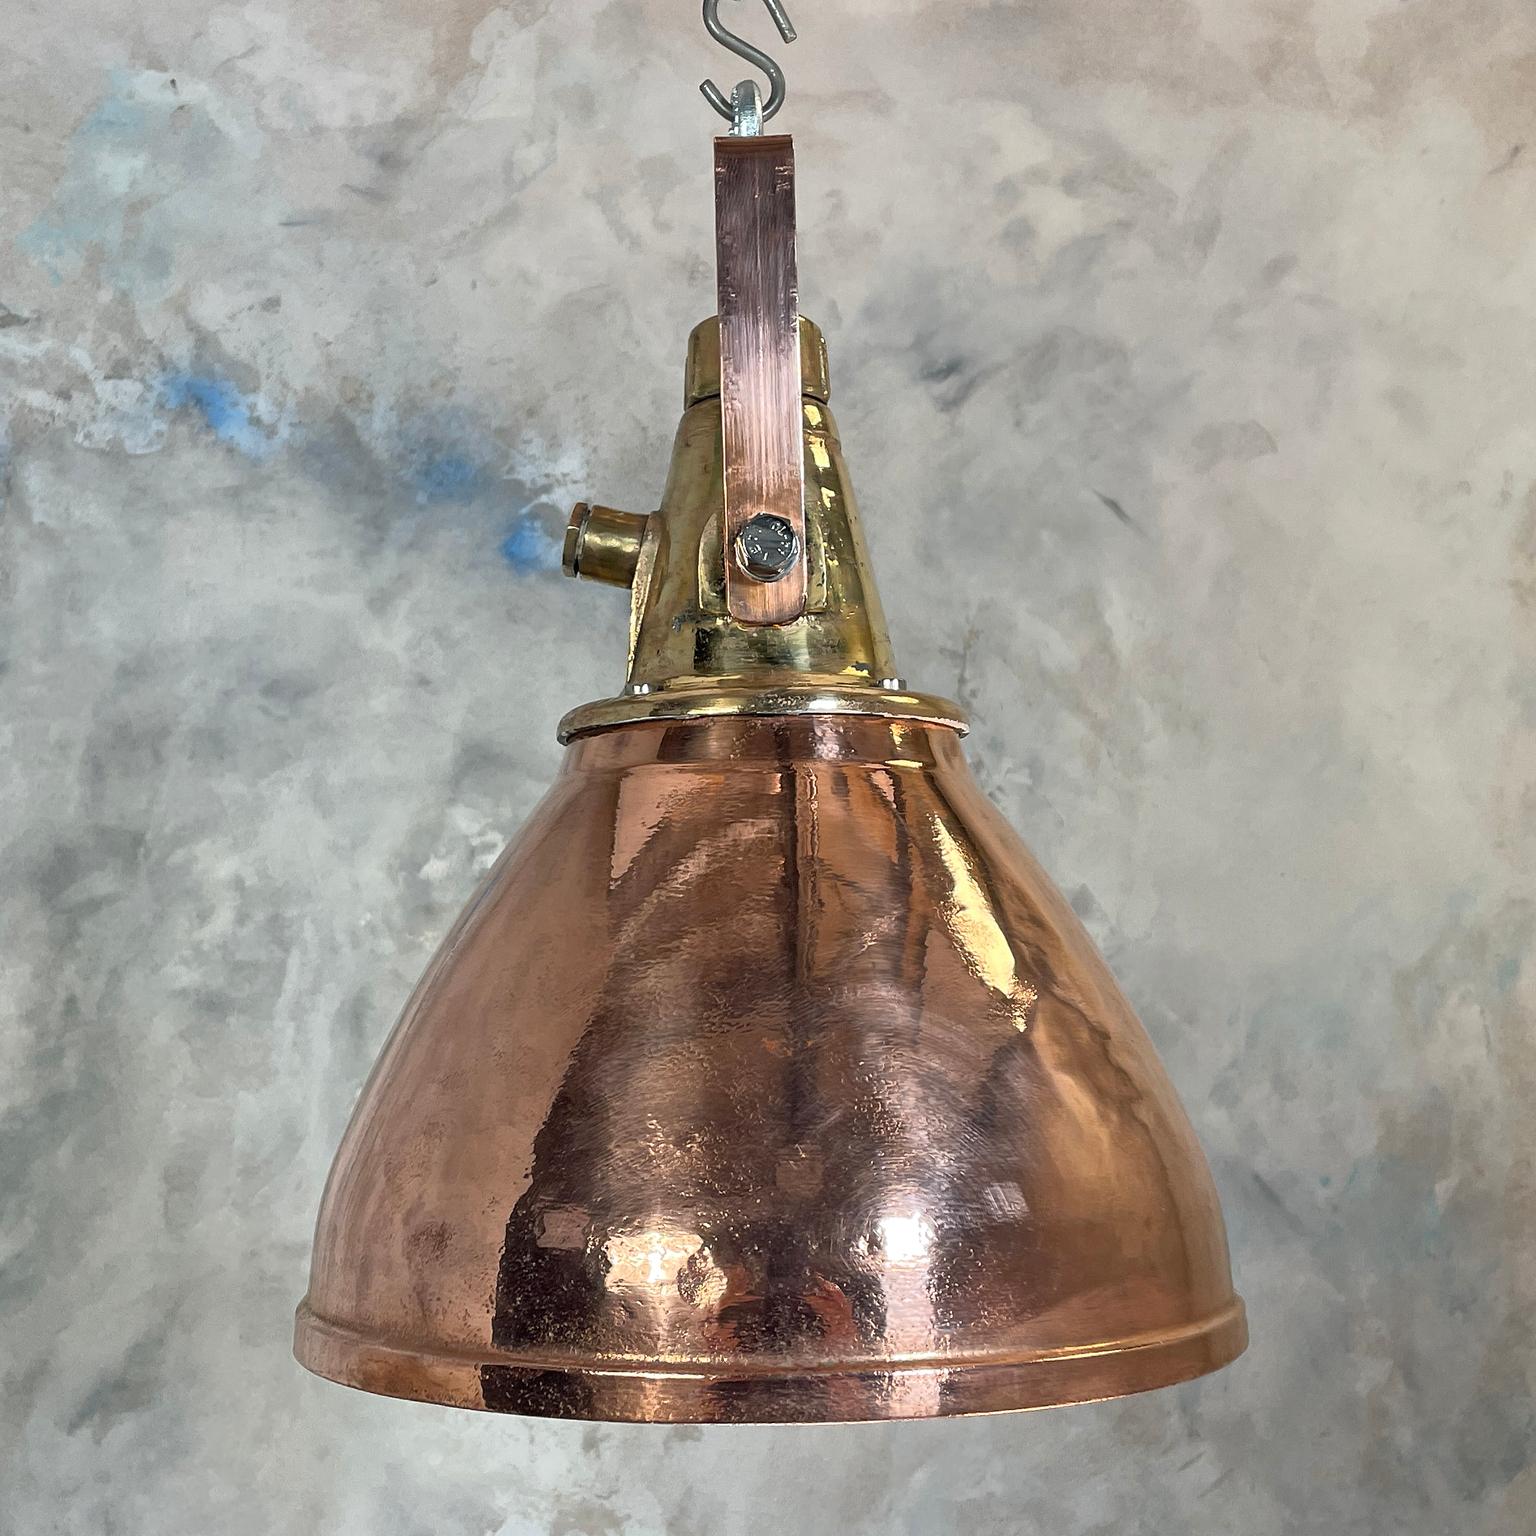 1970s German Copper & Brass Industrial Ceiling Pendant Light with Beam Focus 4